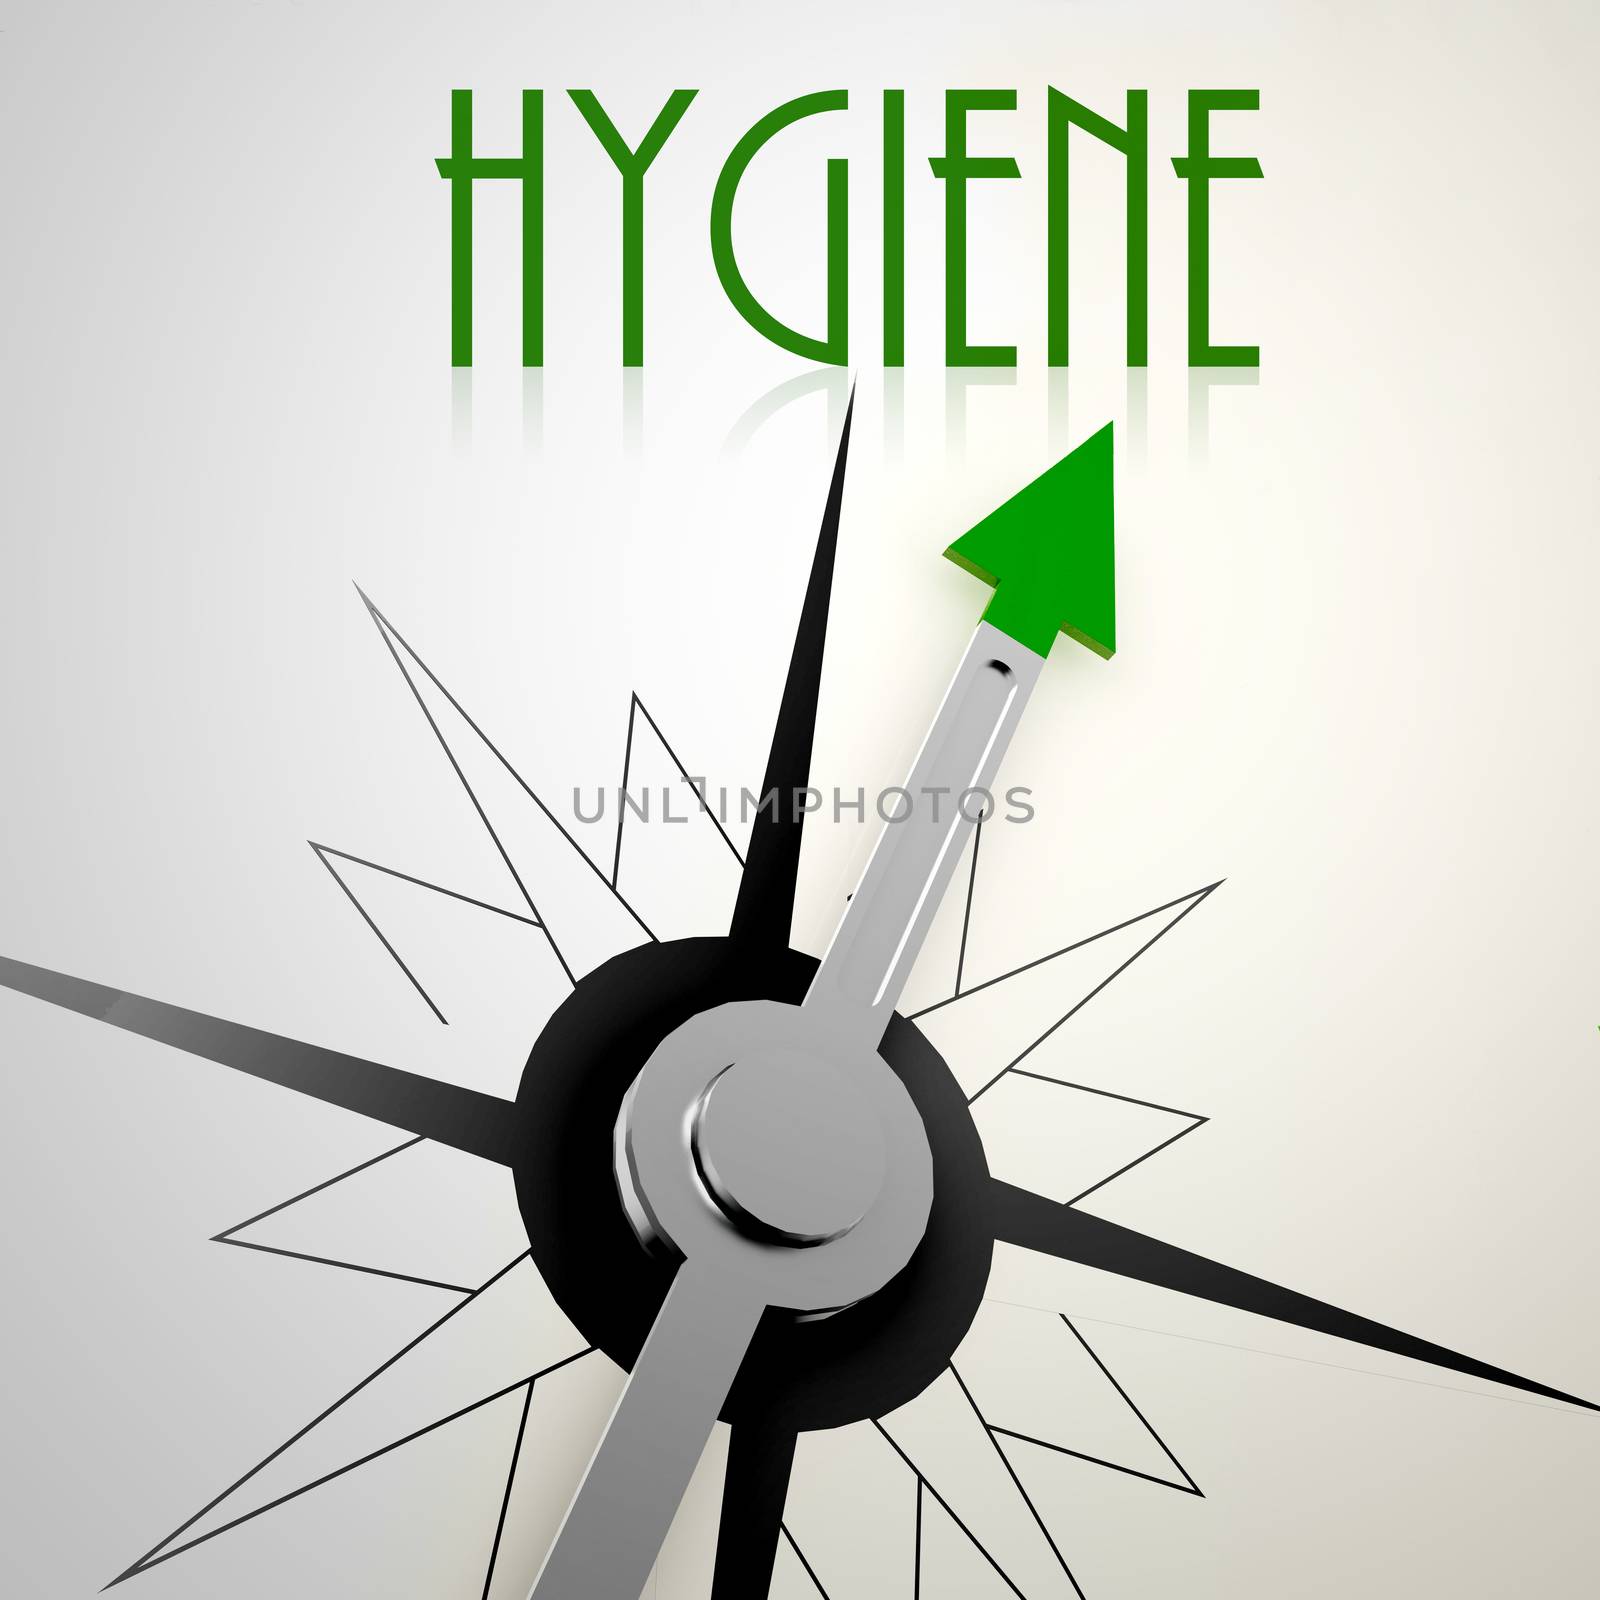 Hygiene on green compass. Concept of healthy lifestyle